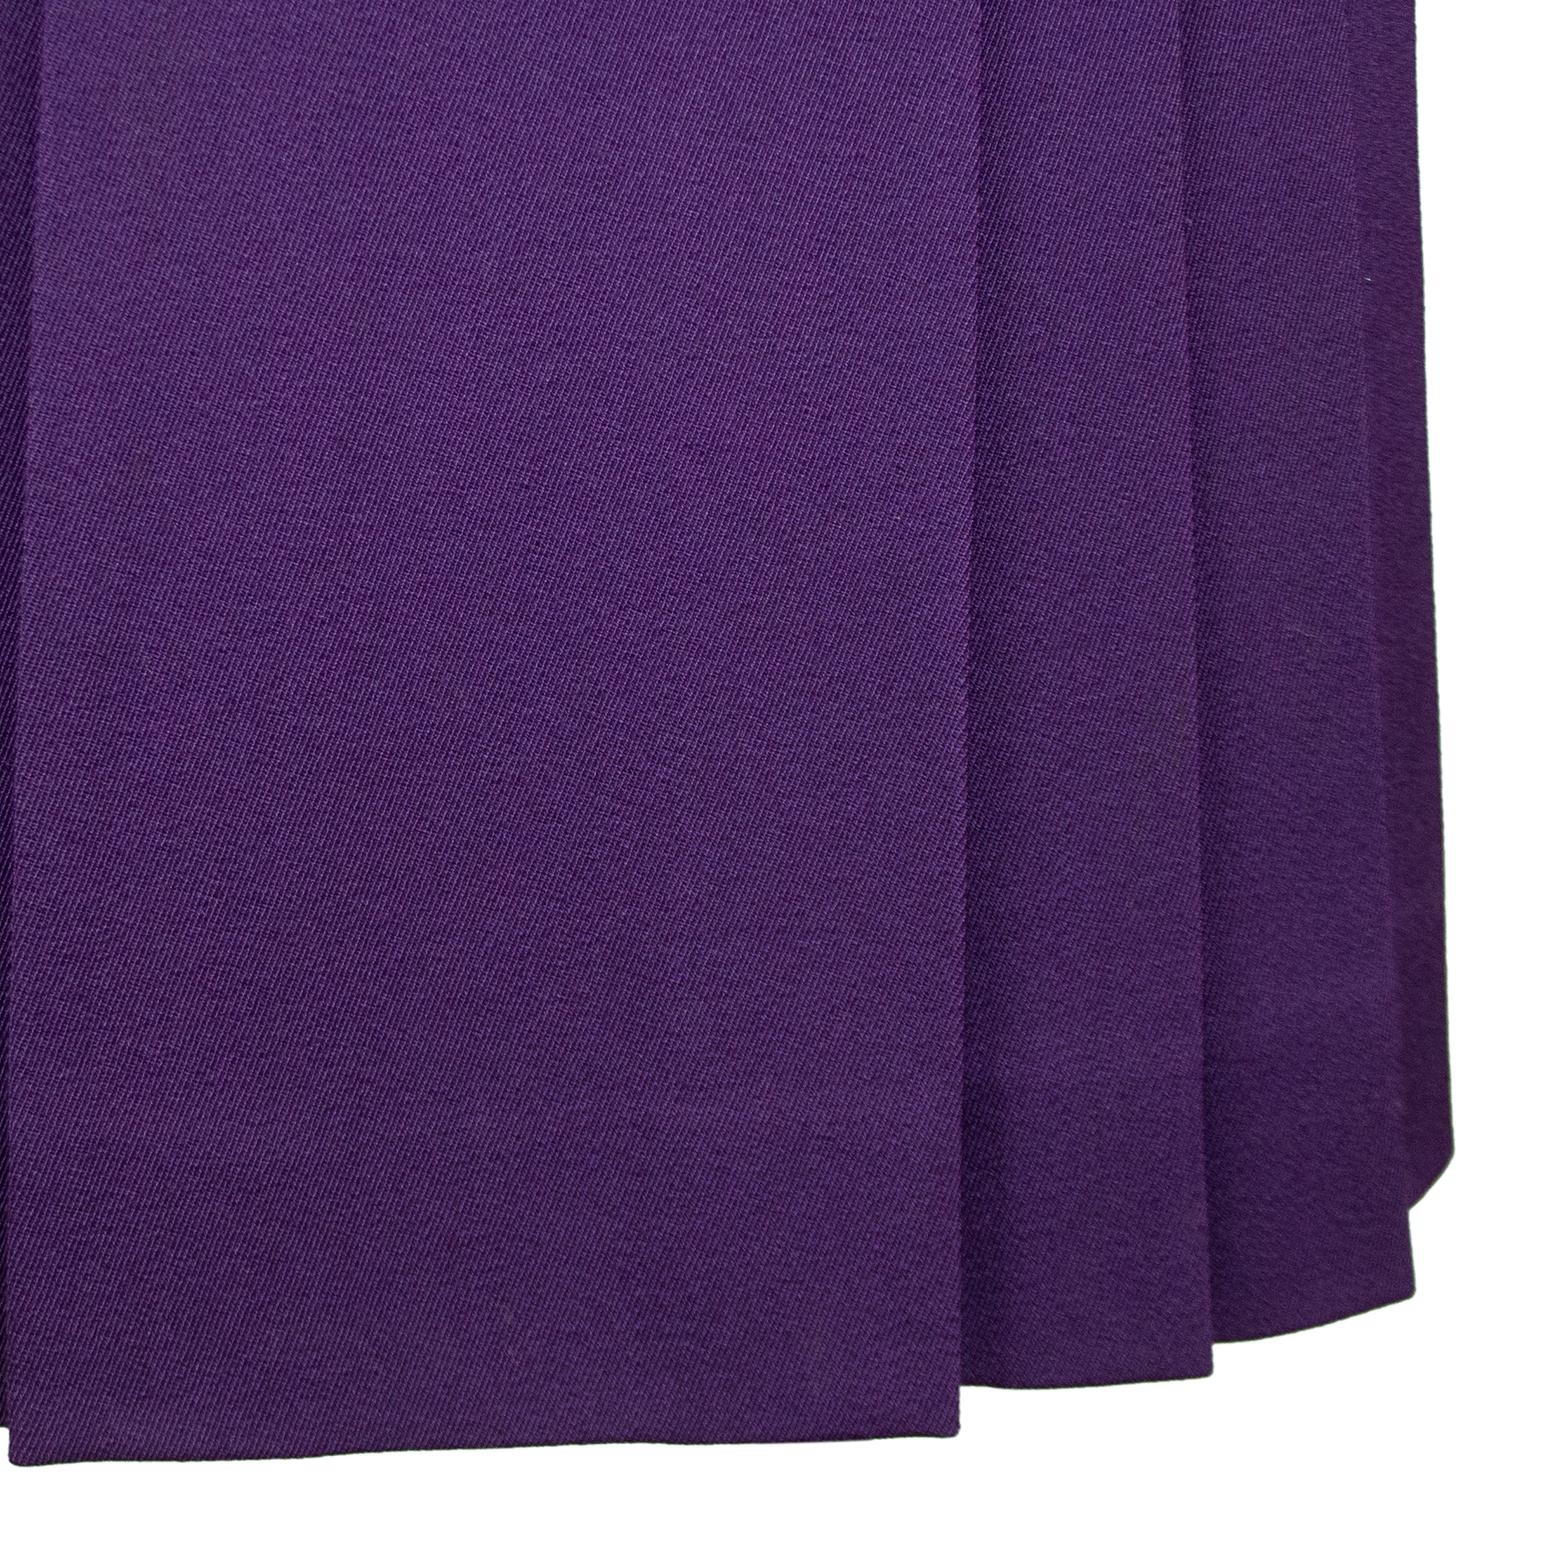 1970s Celine Purple Skirt and Sweater Ensemble For Sale 3